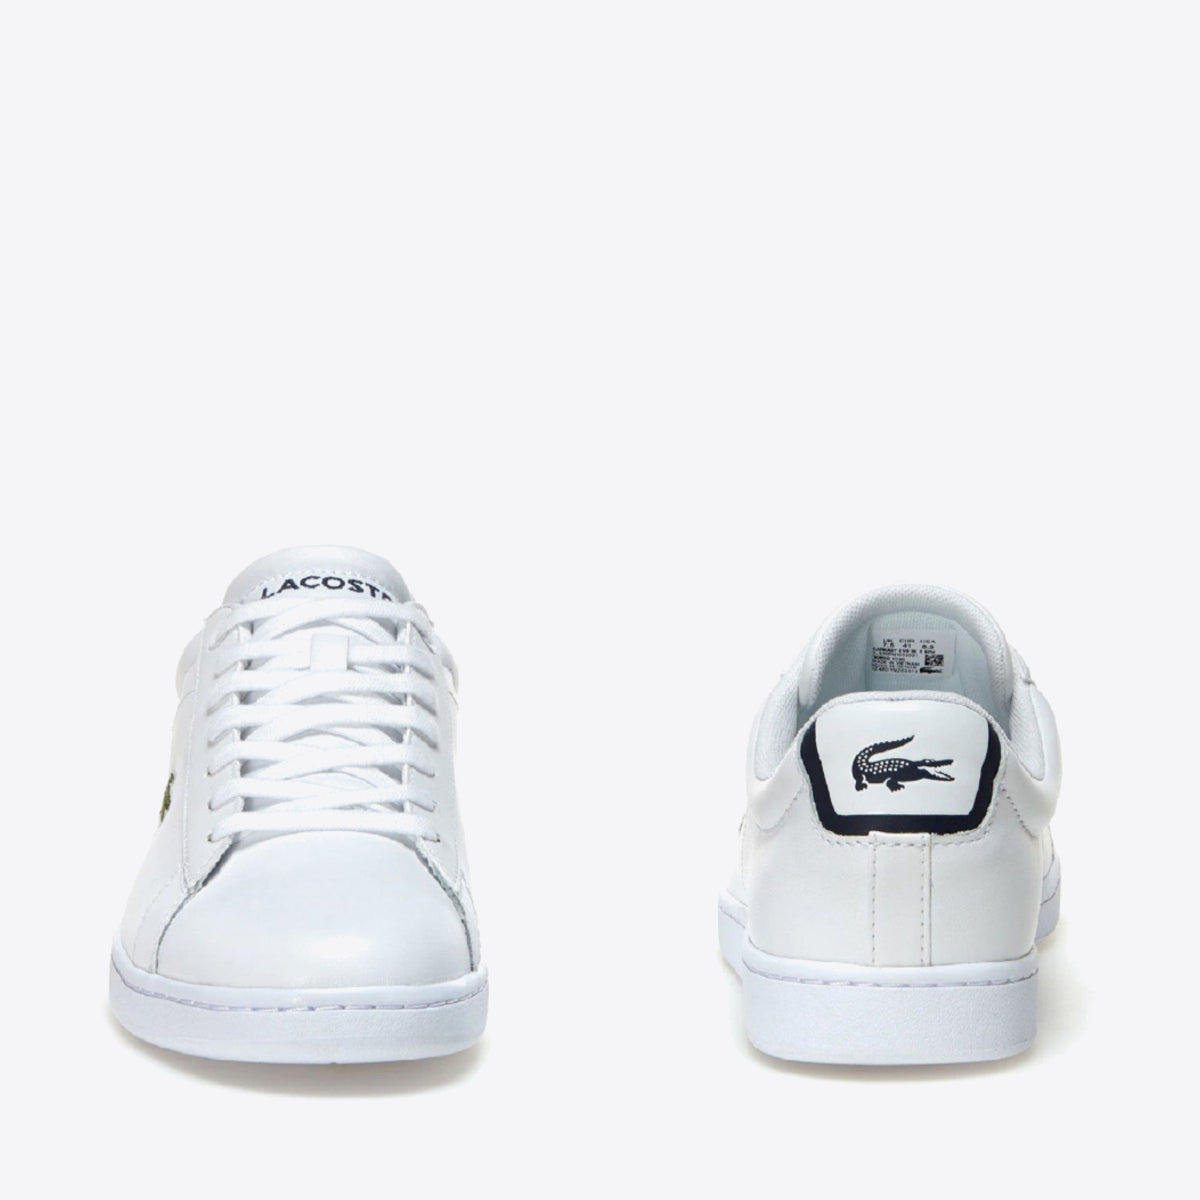 LACOSTE Carnaby Evo Trainer White - Image 6